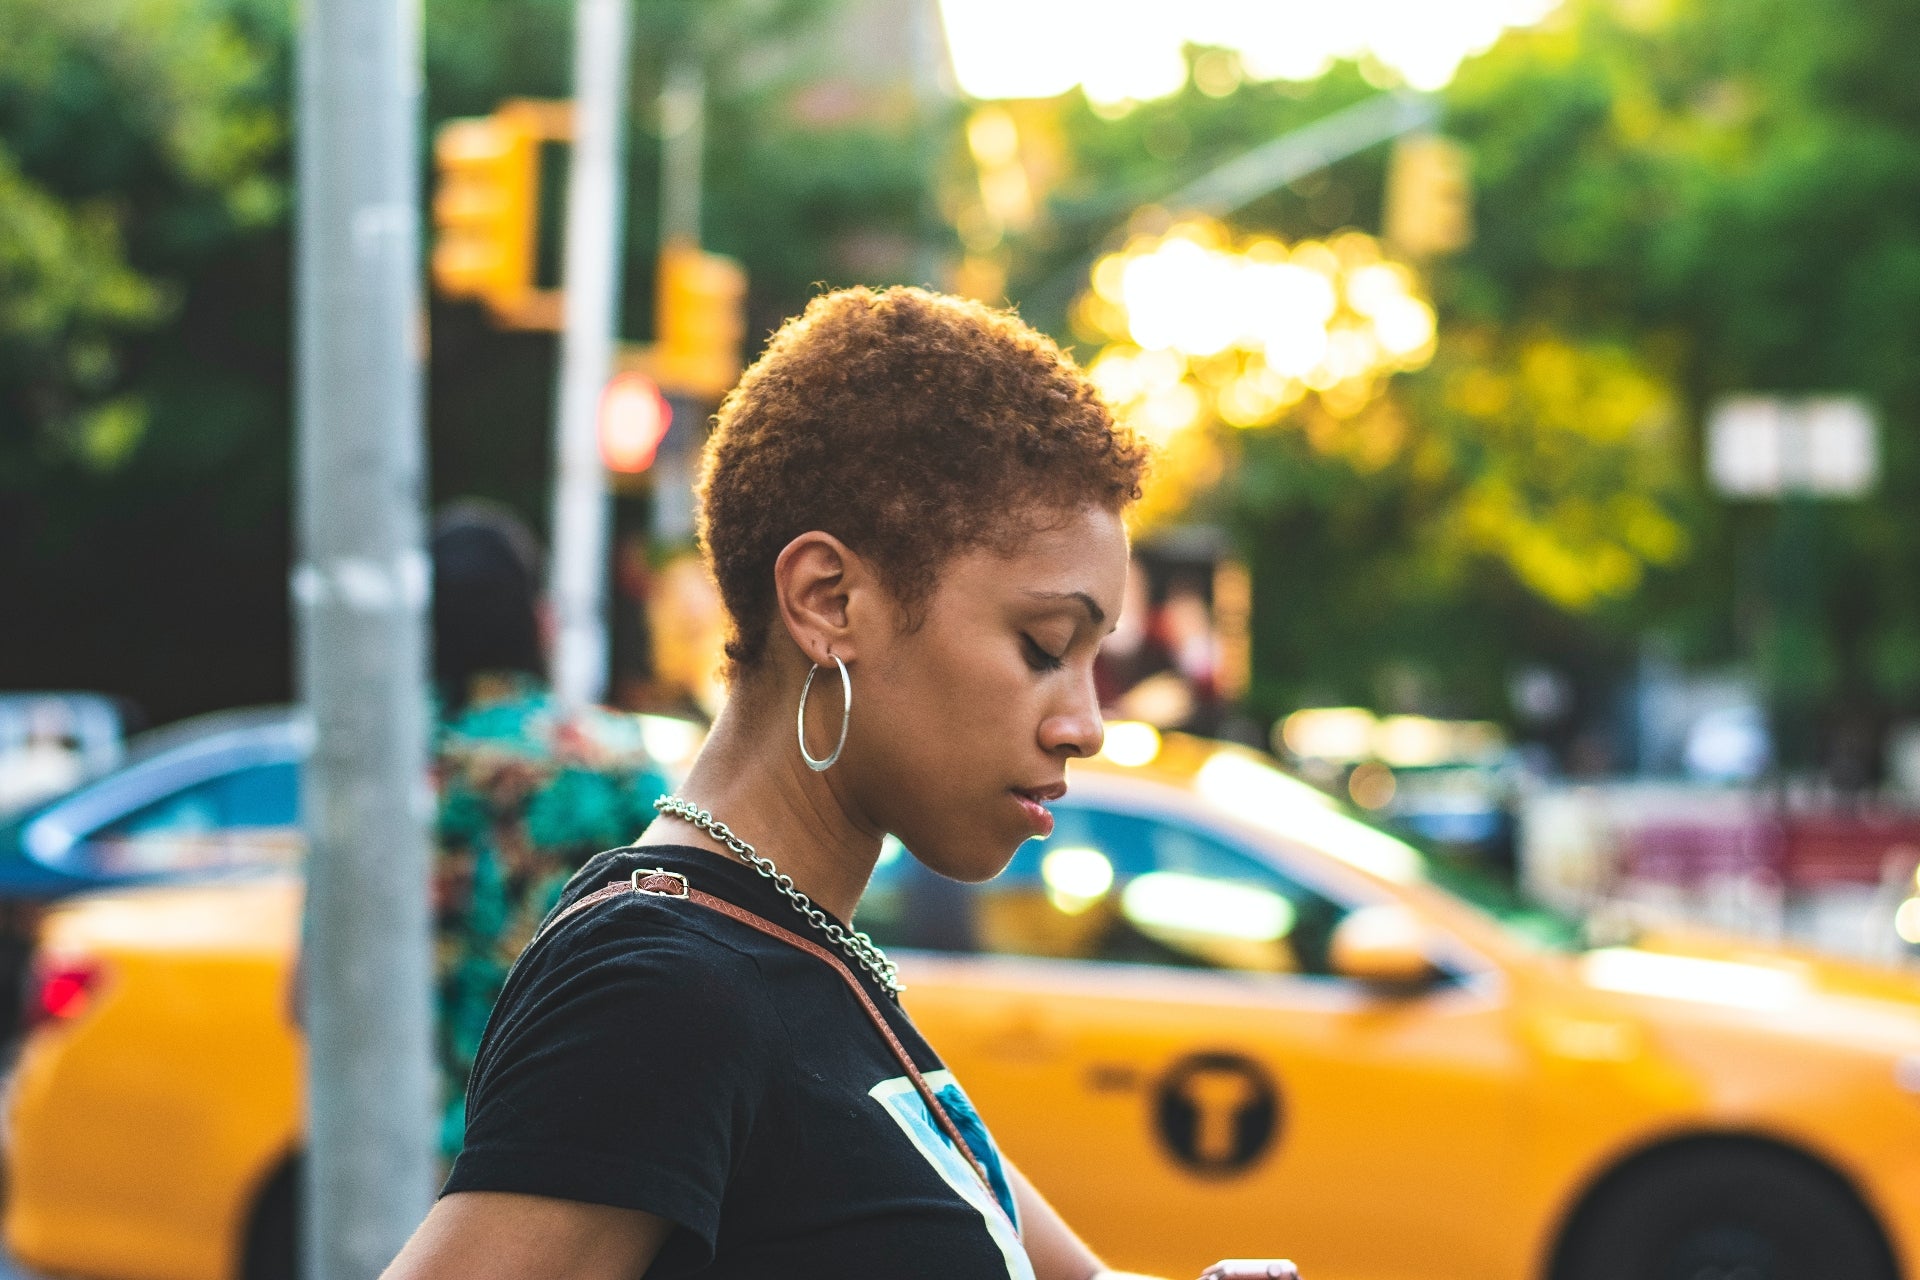 A Black woman with short curly hair looks down at her phone. There is a bright yellow taxi in the background.